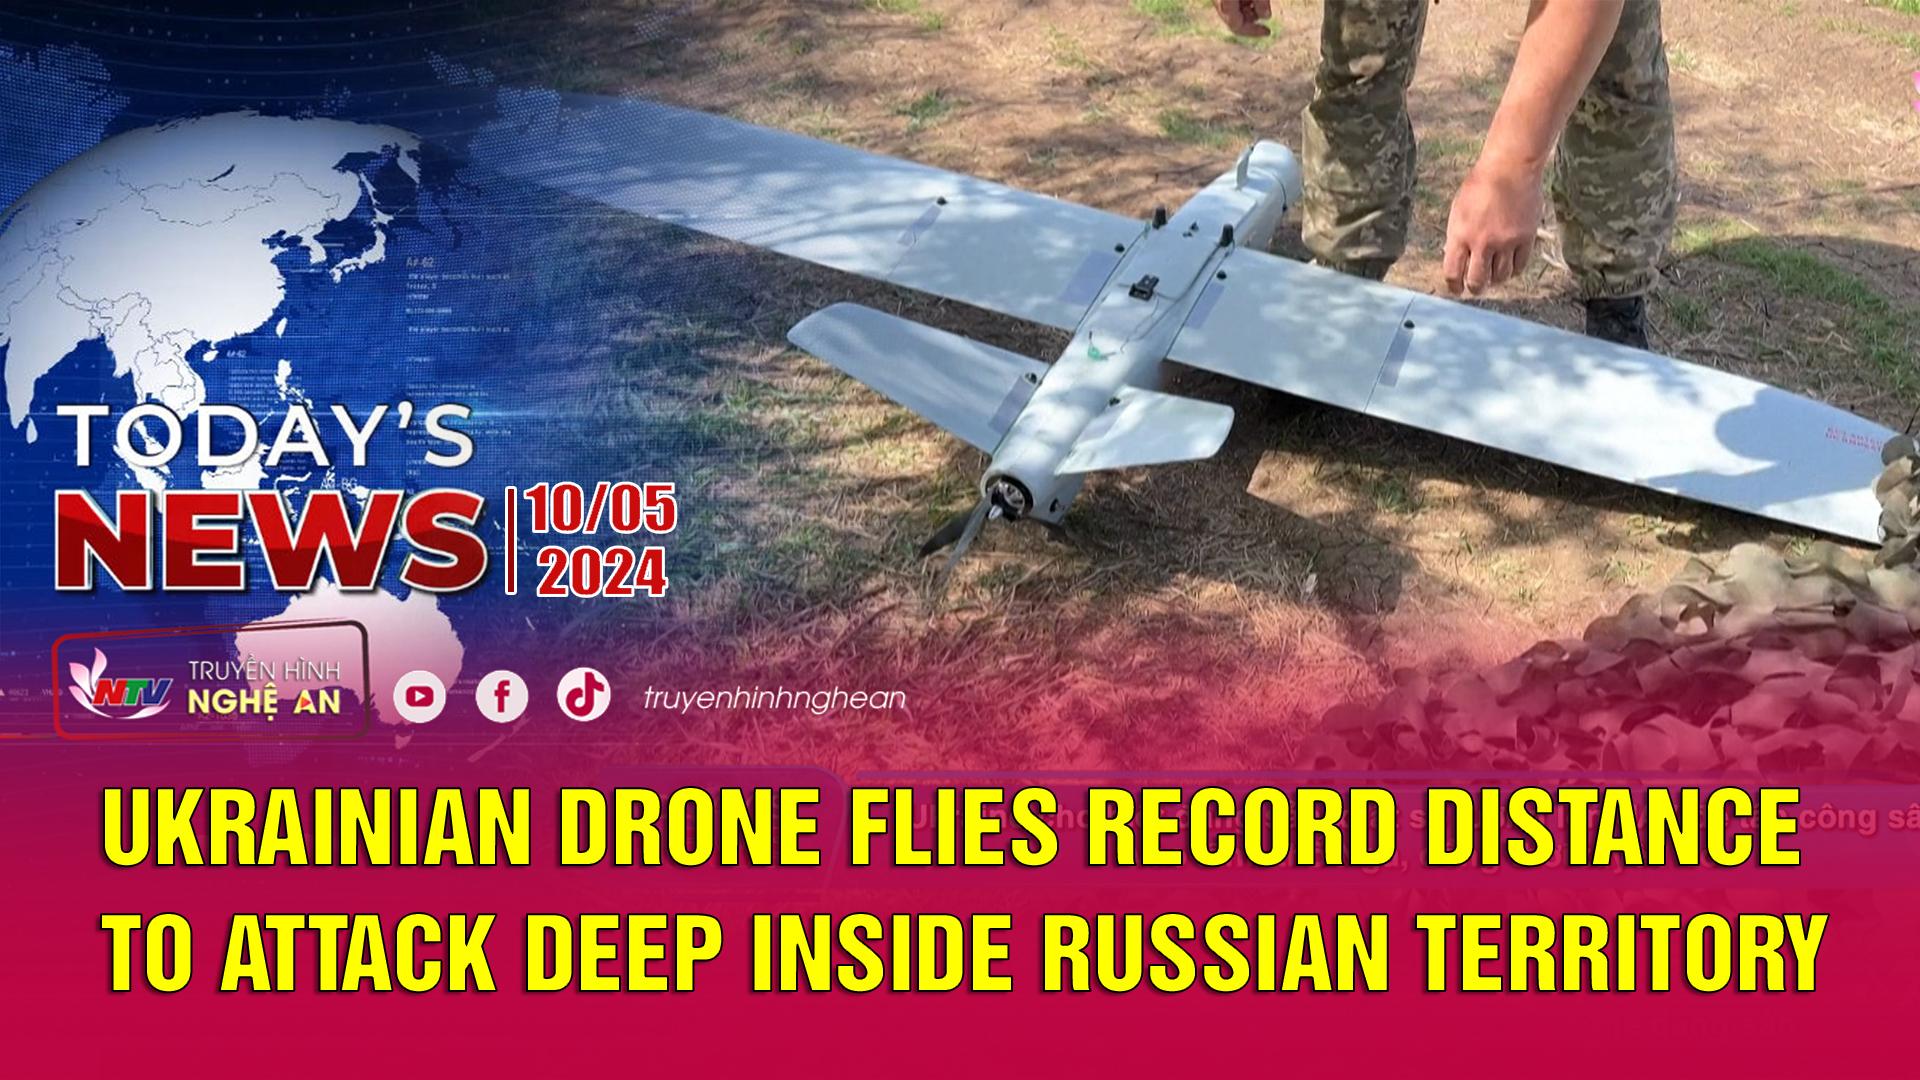 Today's News - 10/05/2024:  Ukrainian drone flies record distance to attack deep inside Russian territory